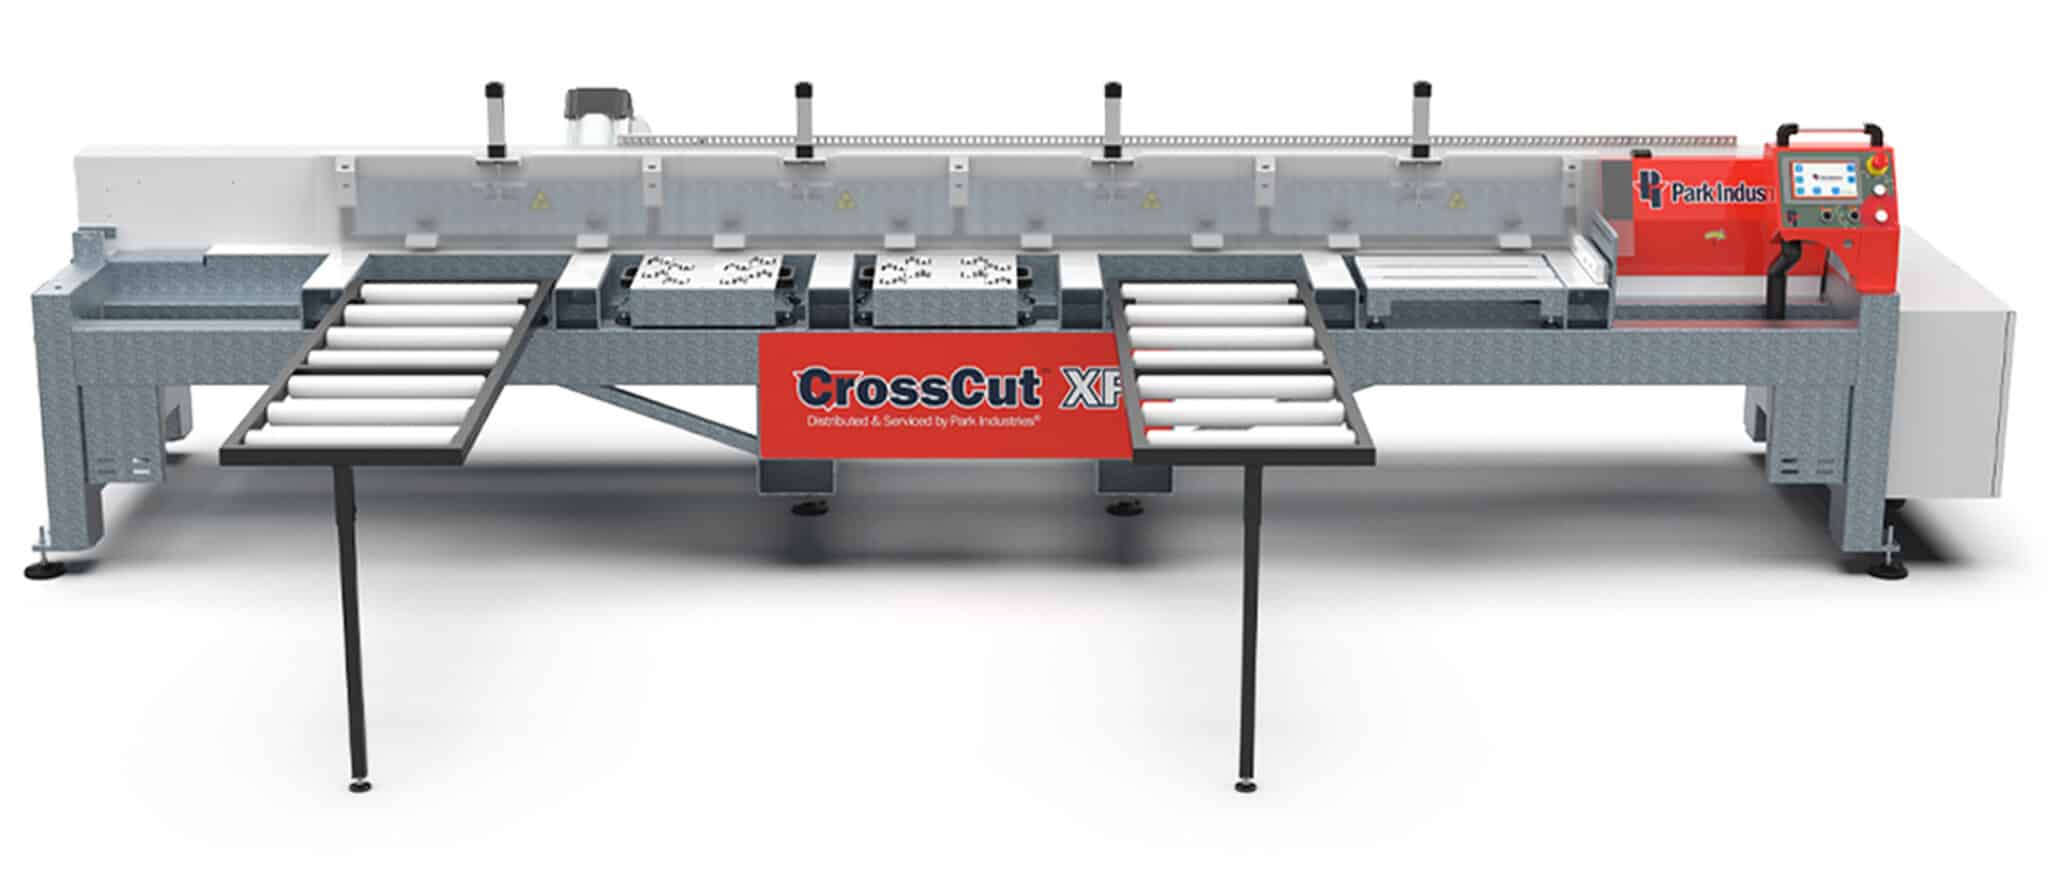 Features of the CrossCut XP Miter Saw | Mitering Machine for Stone, Porcelain, Granite & More